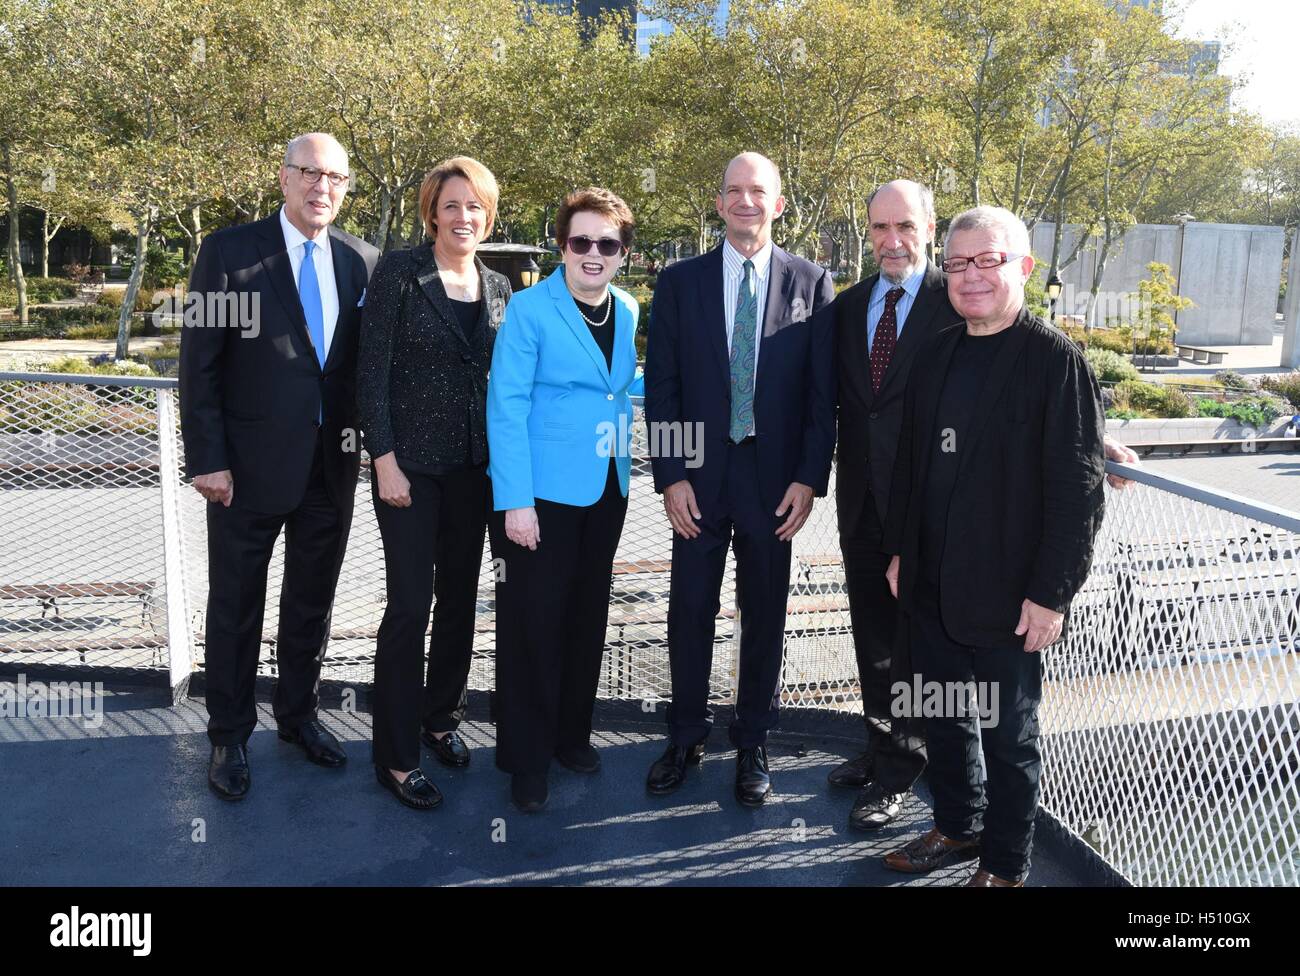 New York, NY, USA. 18th Oct, 2016. Stephen Briganti, Mary Carillo, Billie Jean King, Gregory Annenberg Weingarten, F. Murray Abraham, Daniel Libeskind at arrivals for Statue Of Liberty-Ellis Island Foundation's 2016 Ellis Island Family Heritage Awards, Ellis Island National Museum Of Immigration, New York, NY October 18, 2016. Credit:  Derek Storm/Everett Collection/Alamy Live News Stock Photo